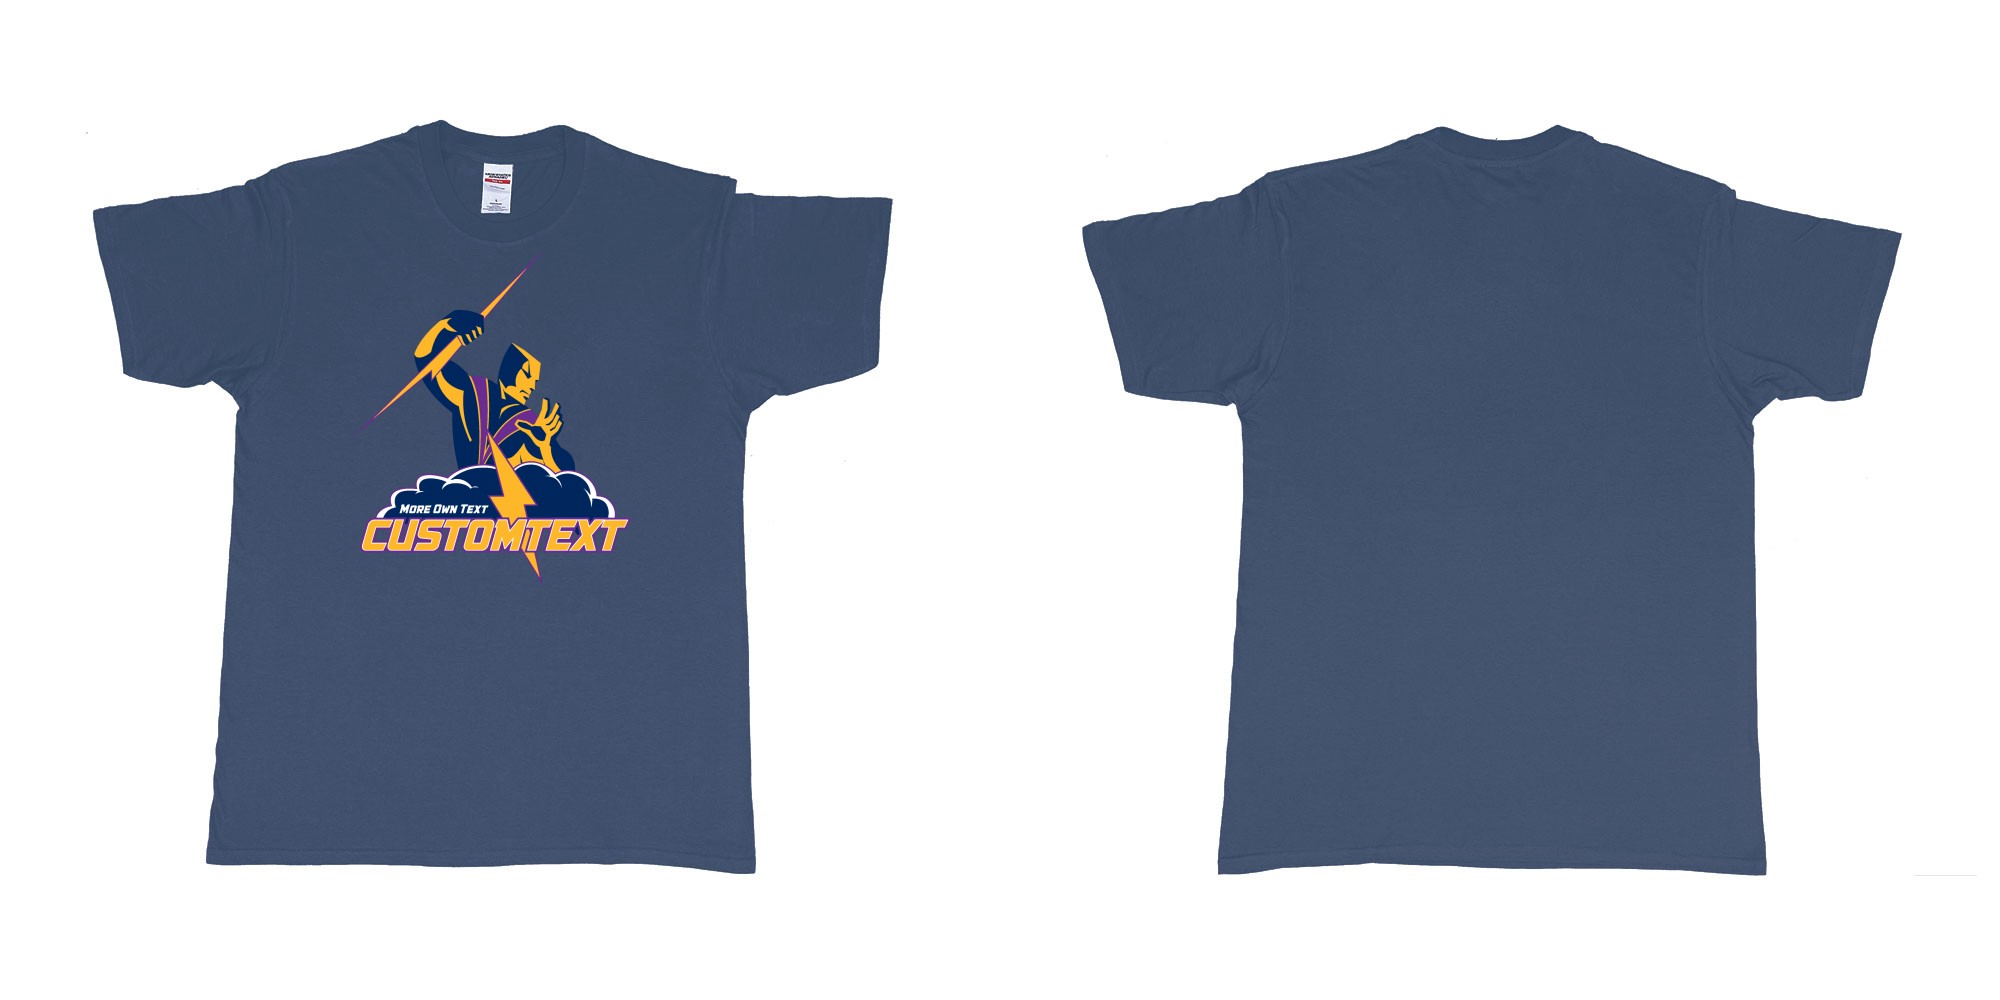 Custom tshirt design  in fabric color navy choice your own text made in Bali by The Pirate Way